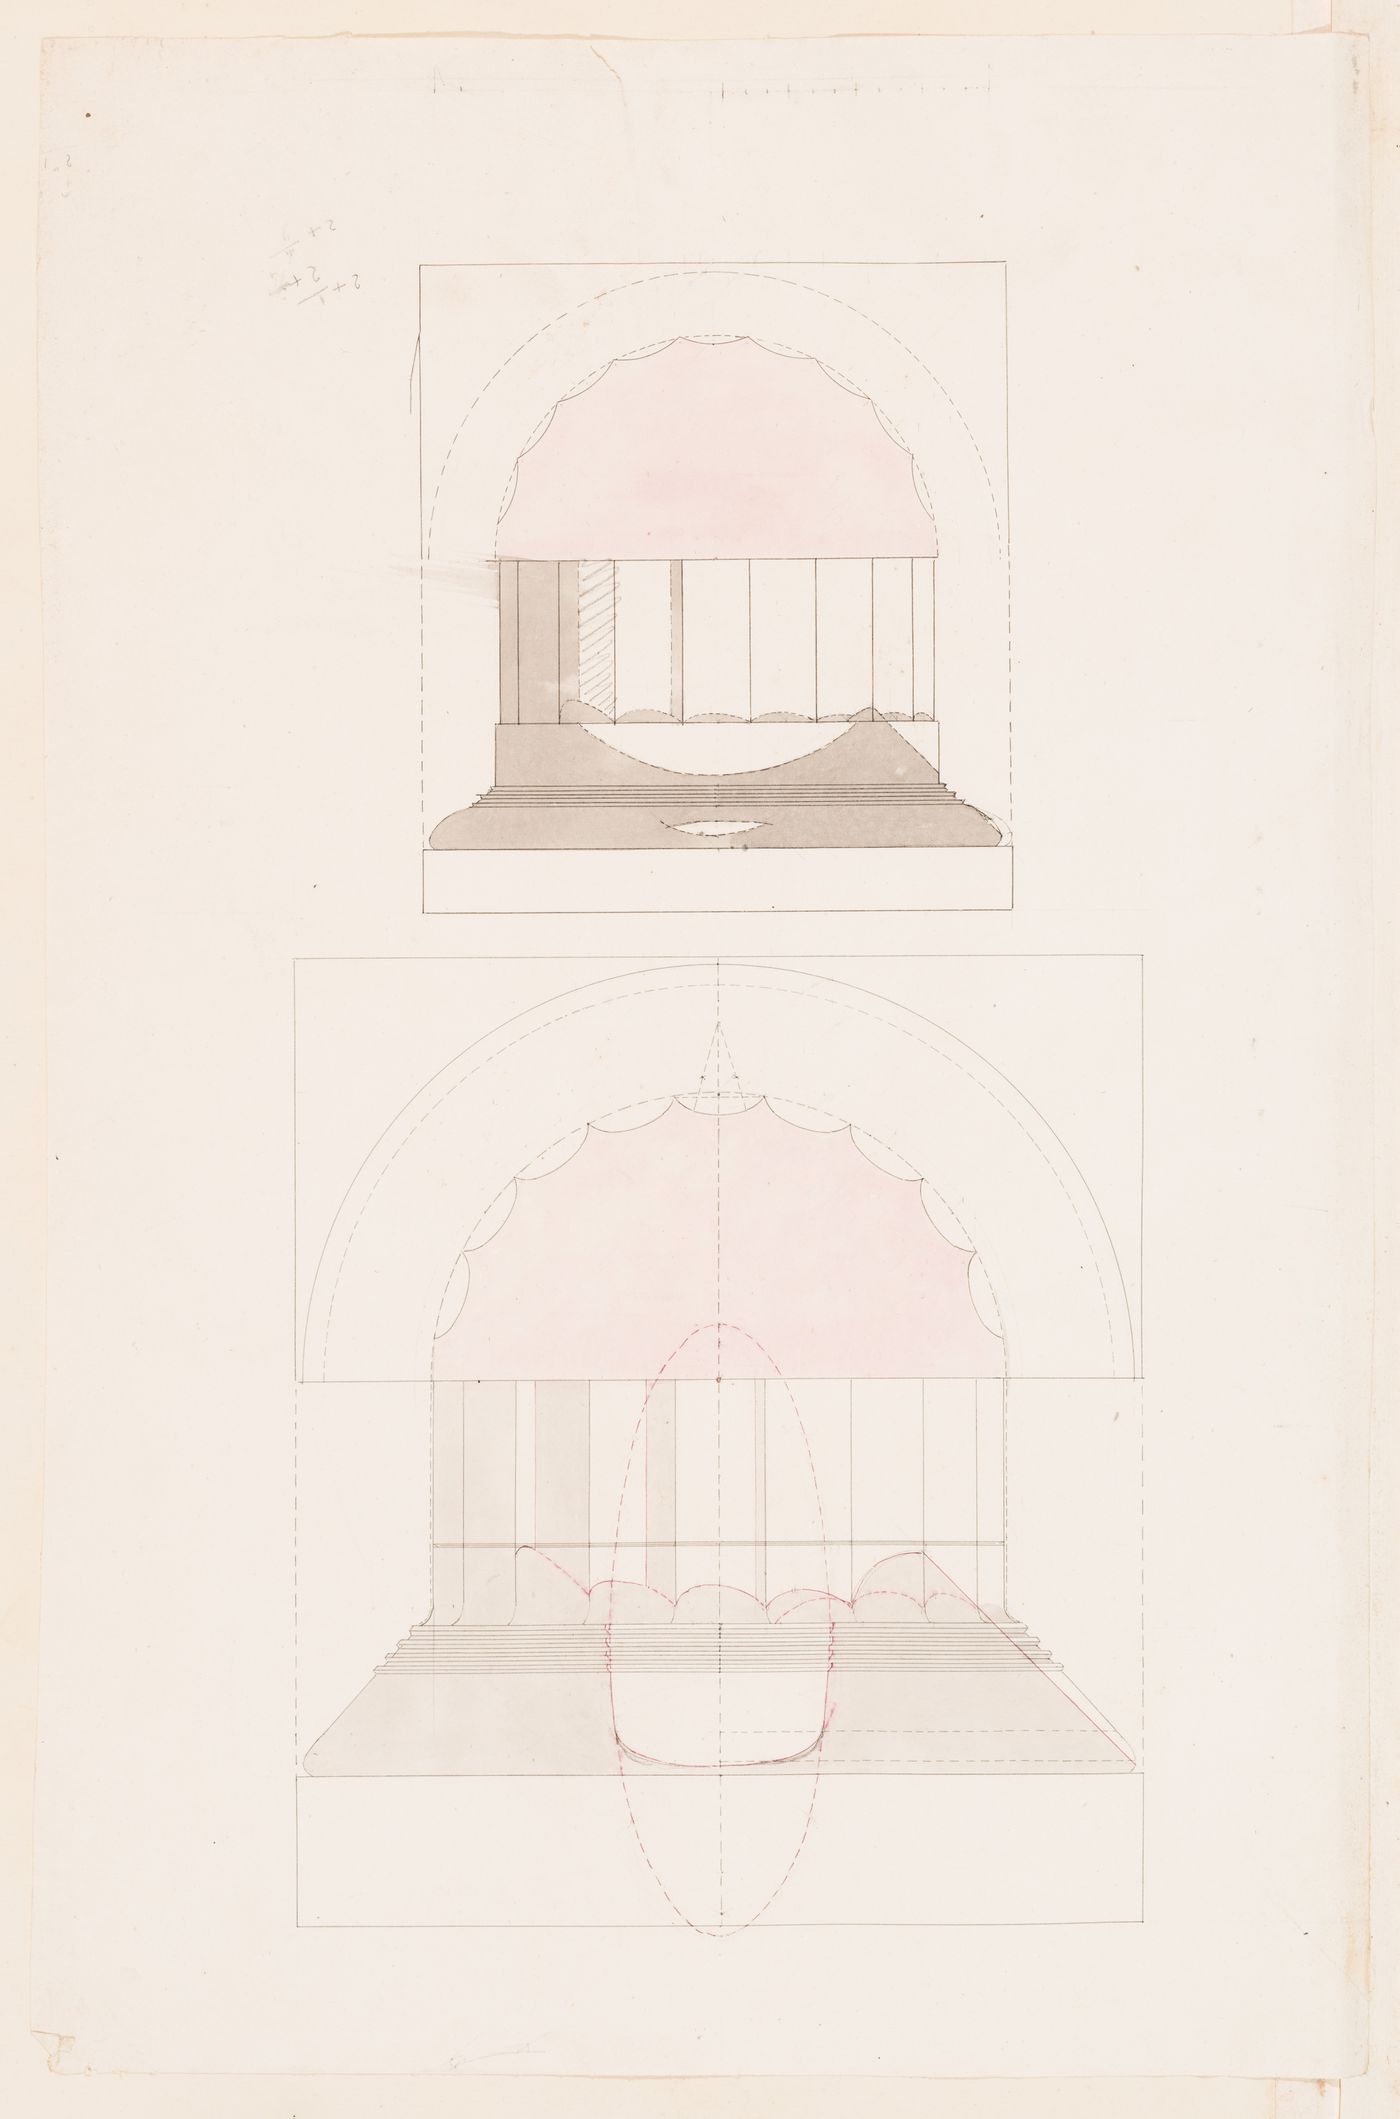 Elevations and plans of two Doric capitals